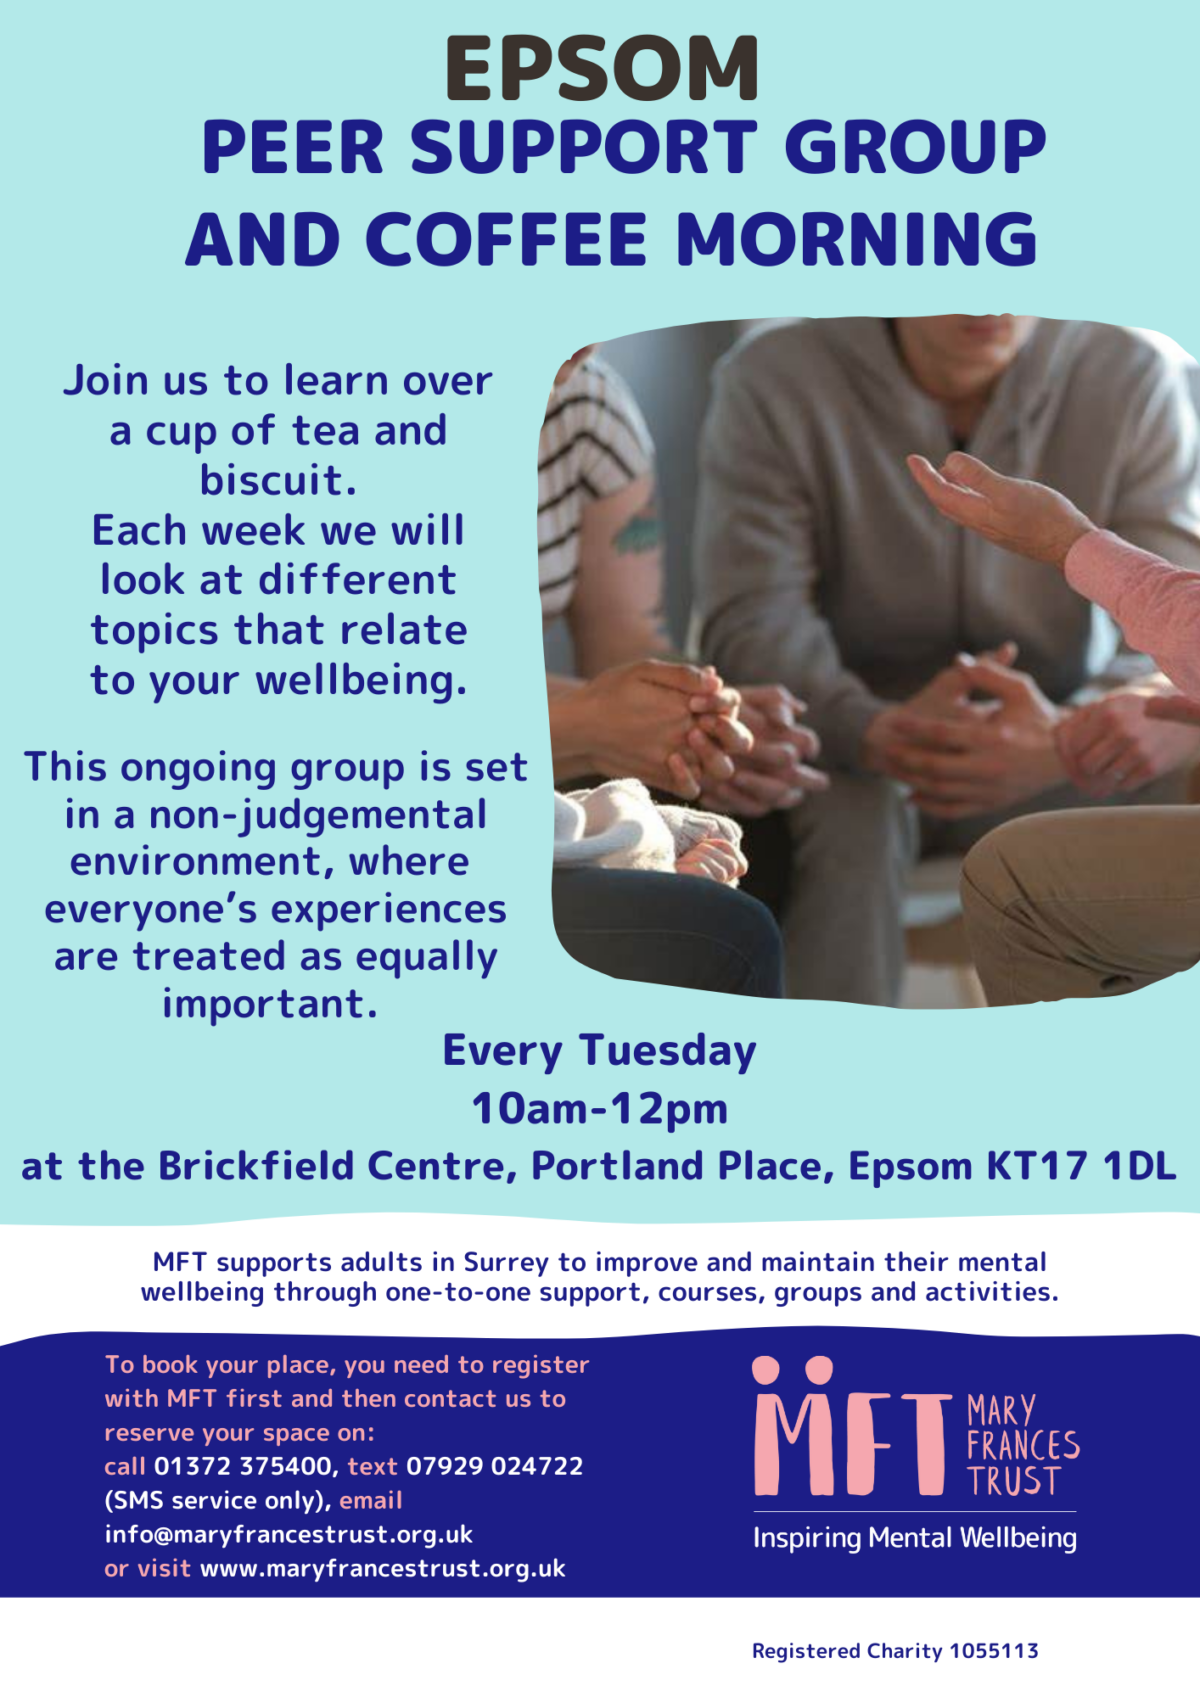 Epsom Coffee Morning and Peer Support Group